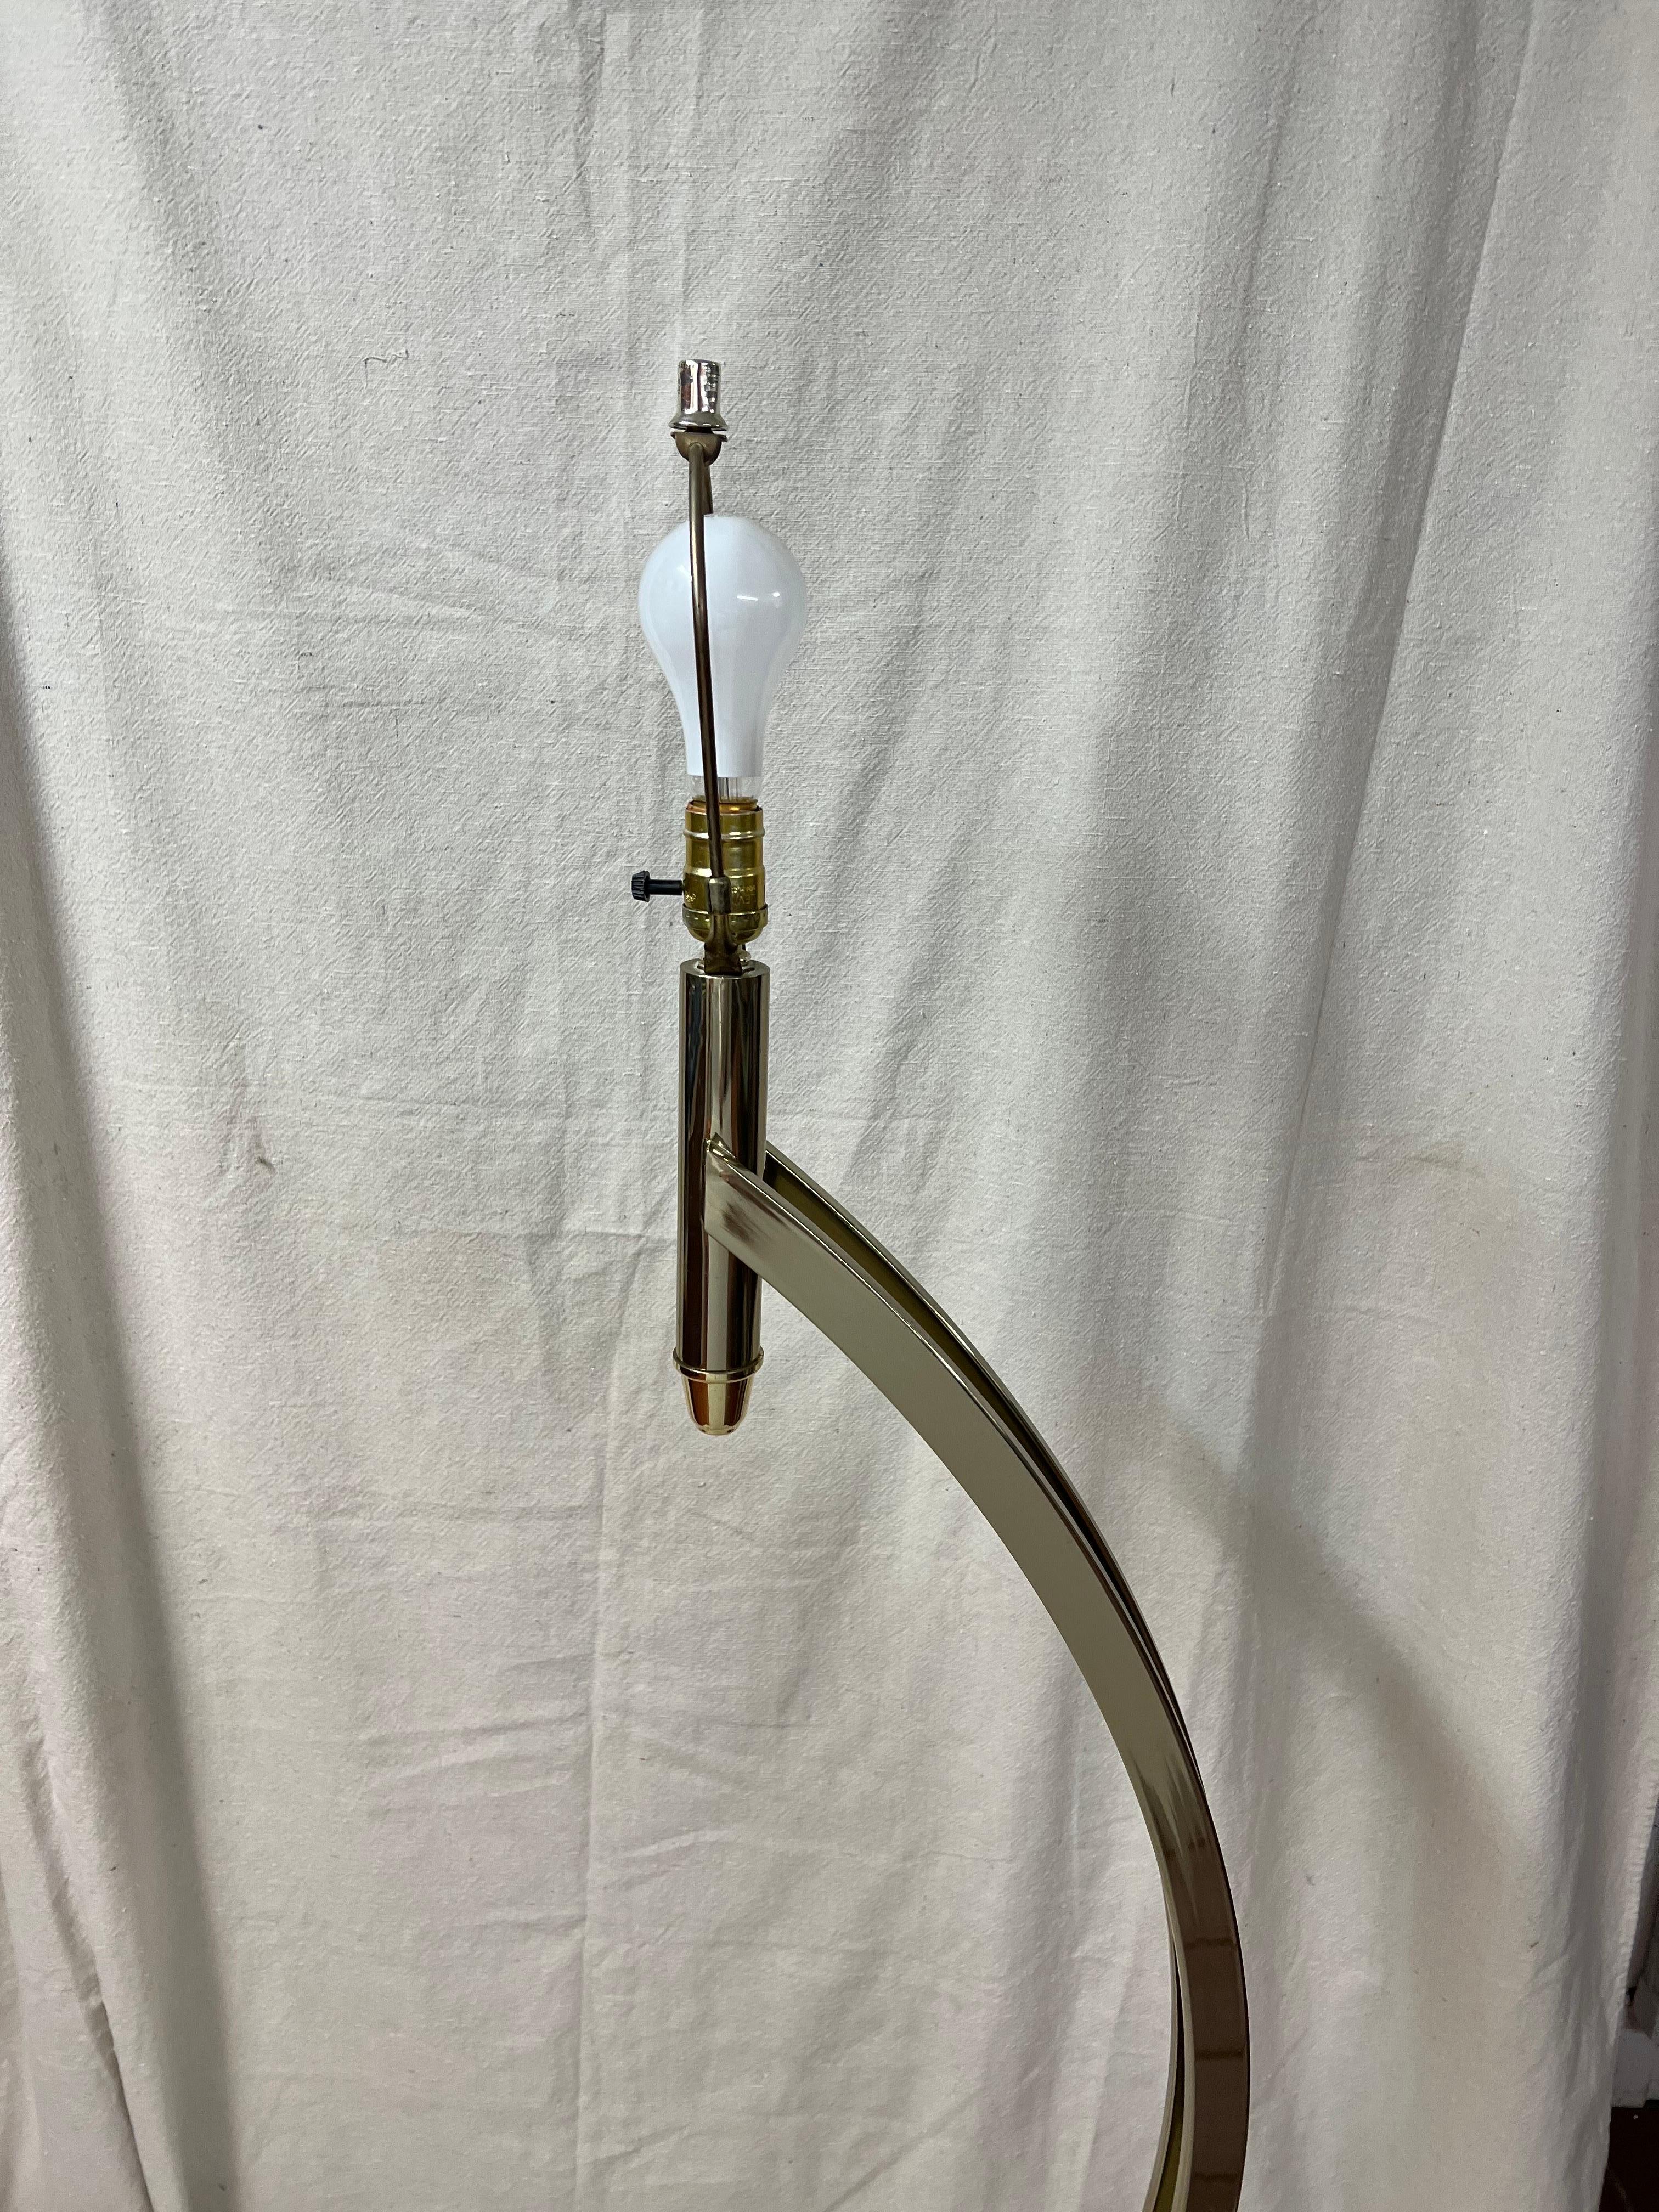 Post Modern Brass Floor Lamp In Good Condition For Sale In Redding, CT